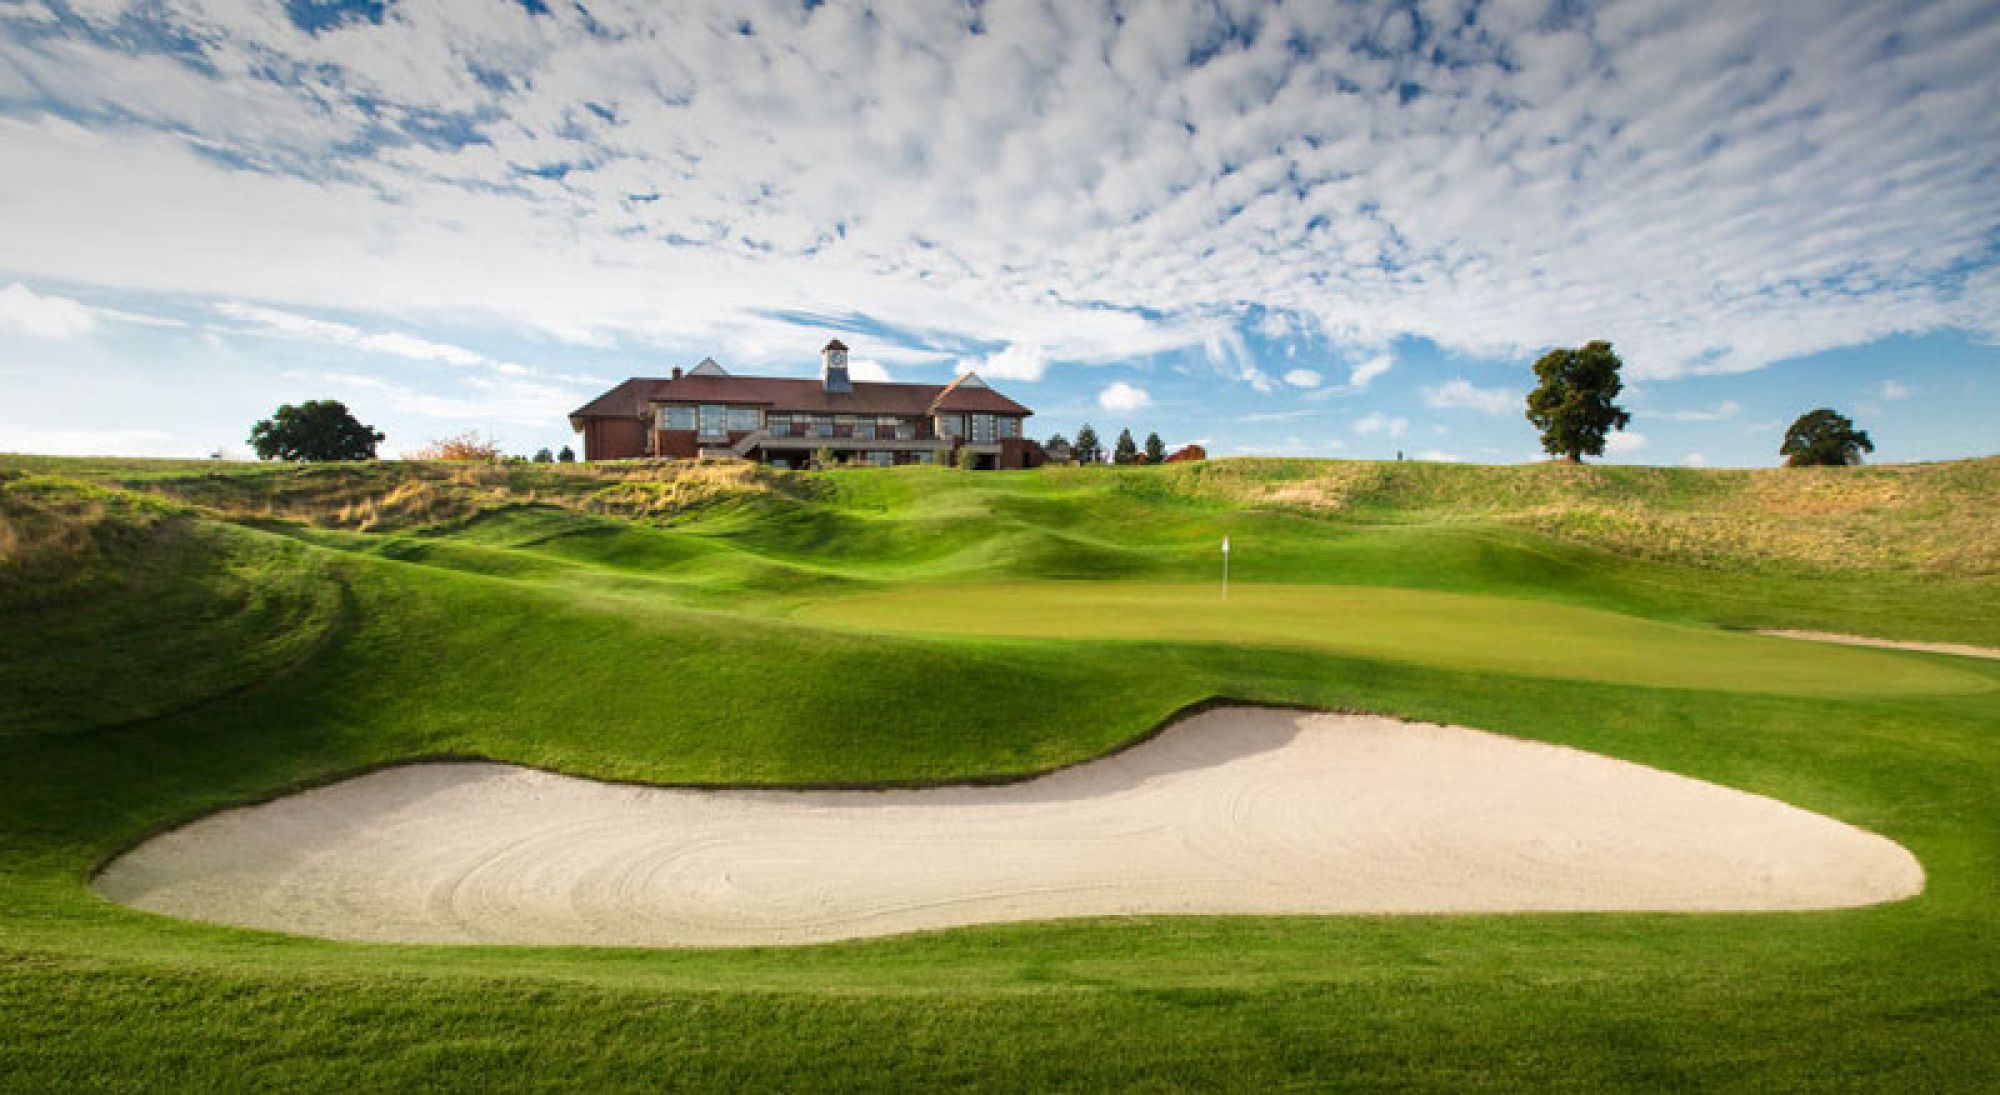 View The Oxfordshire Golf Club's beautiful golf course situated in amazing Oxfordshire.